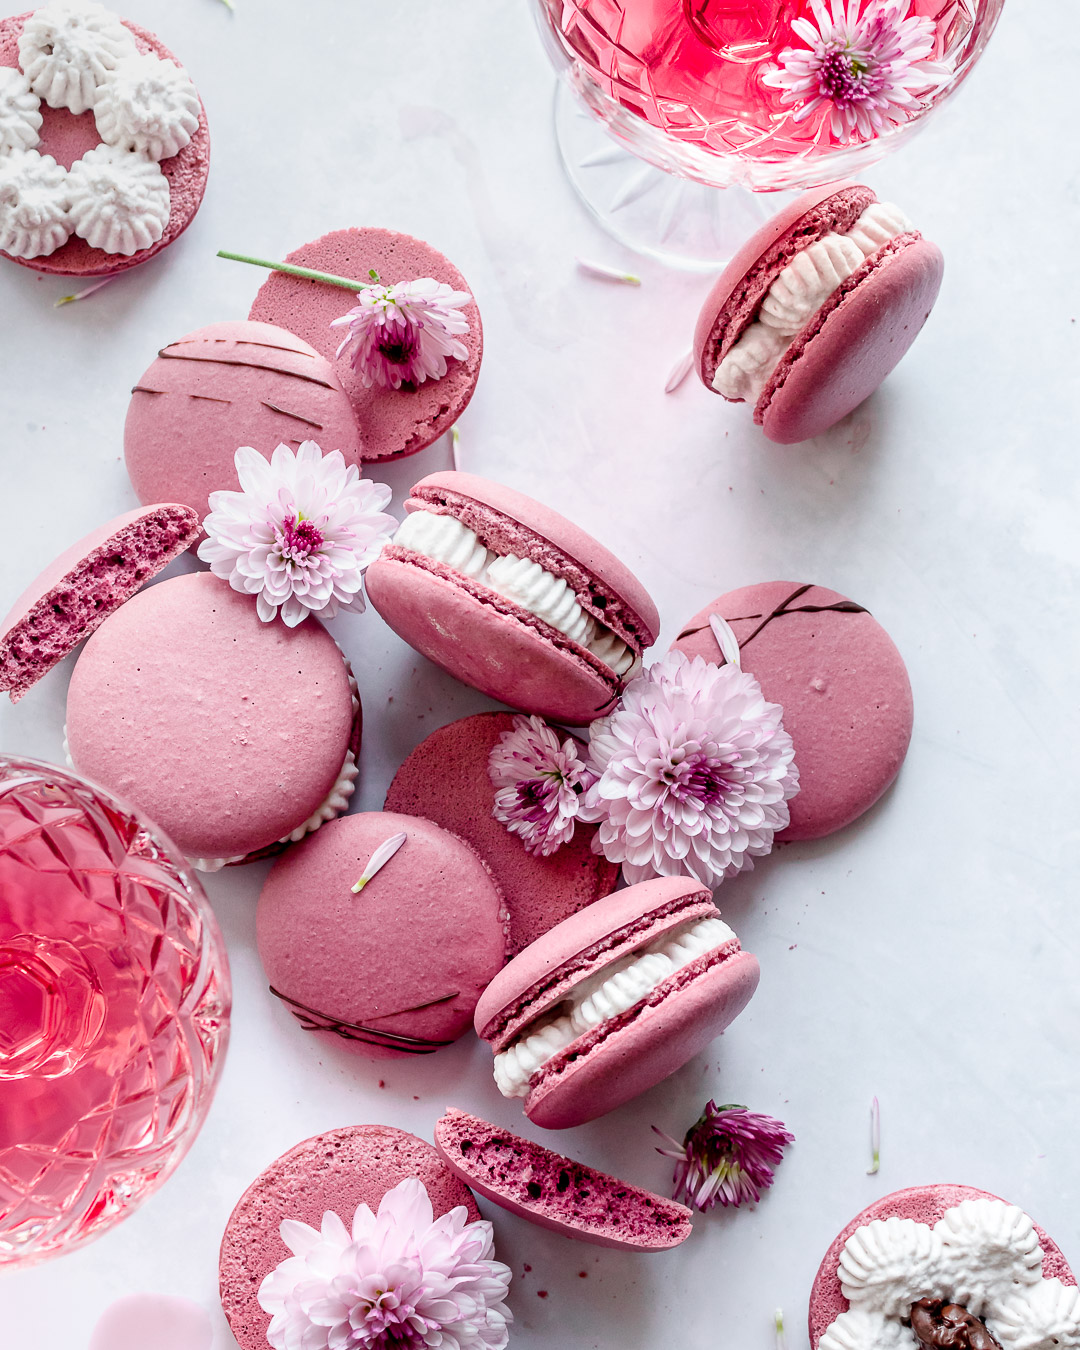 red wine macarons with purple flowers